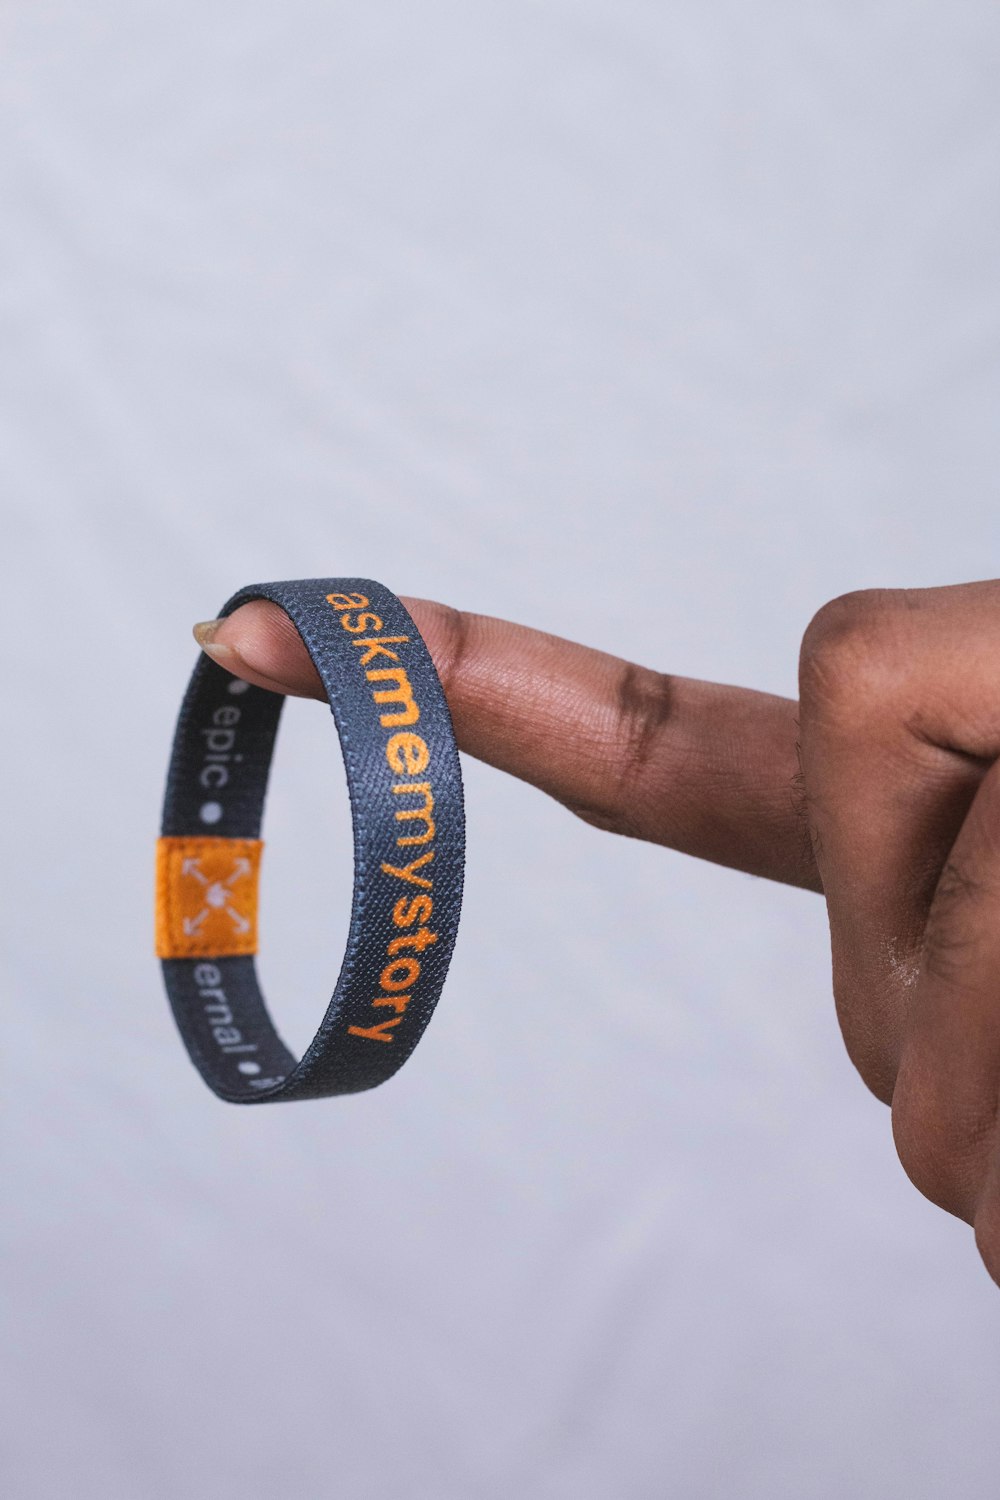 a hand holding a wristband with a message on it